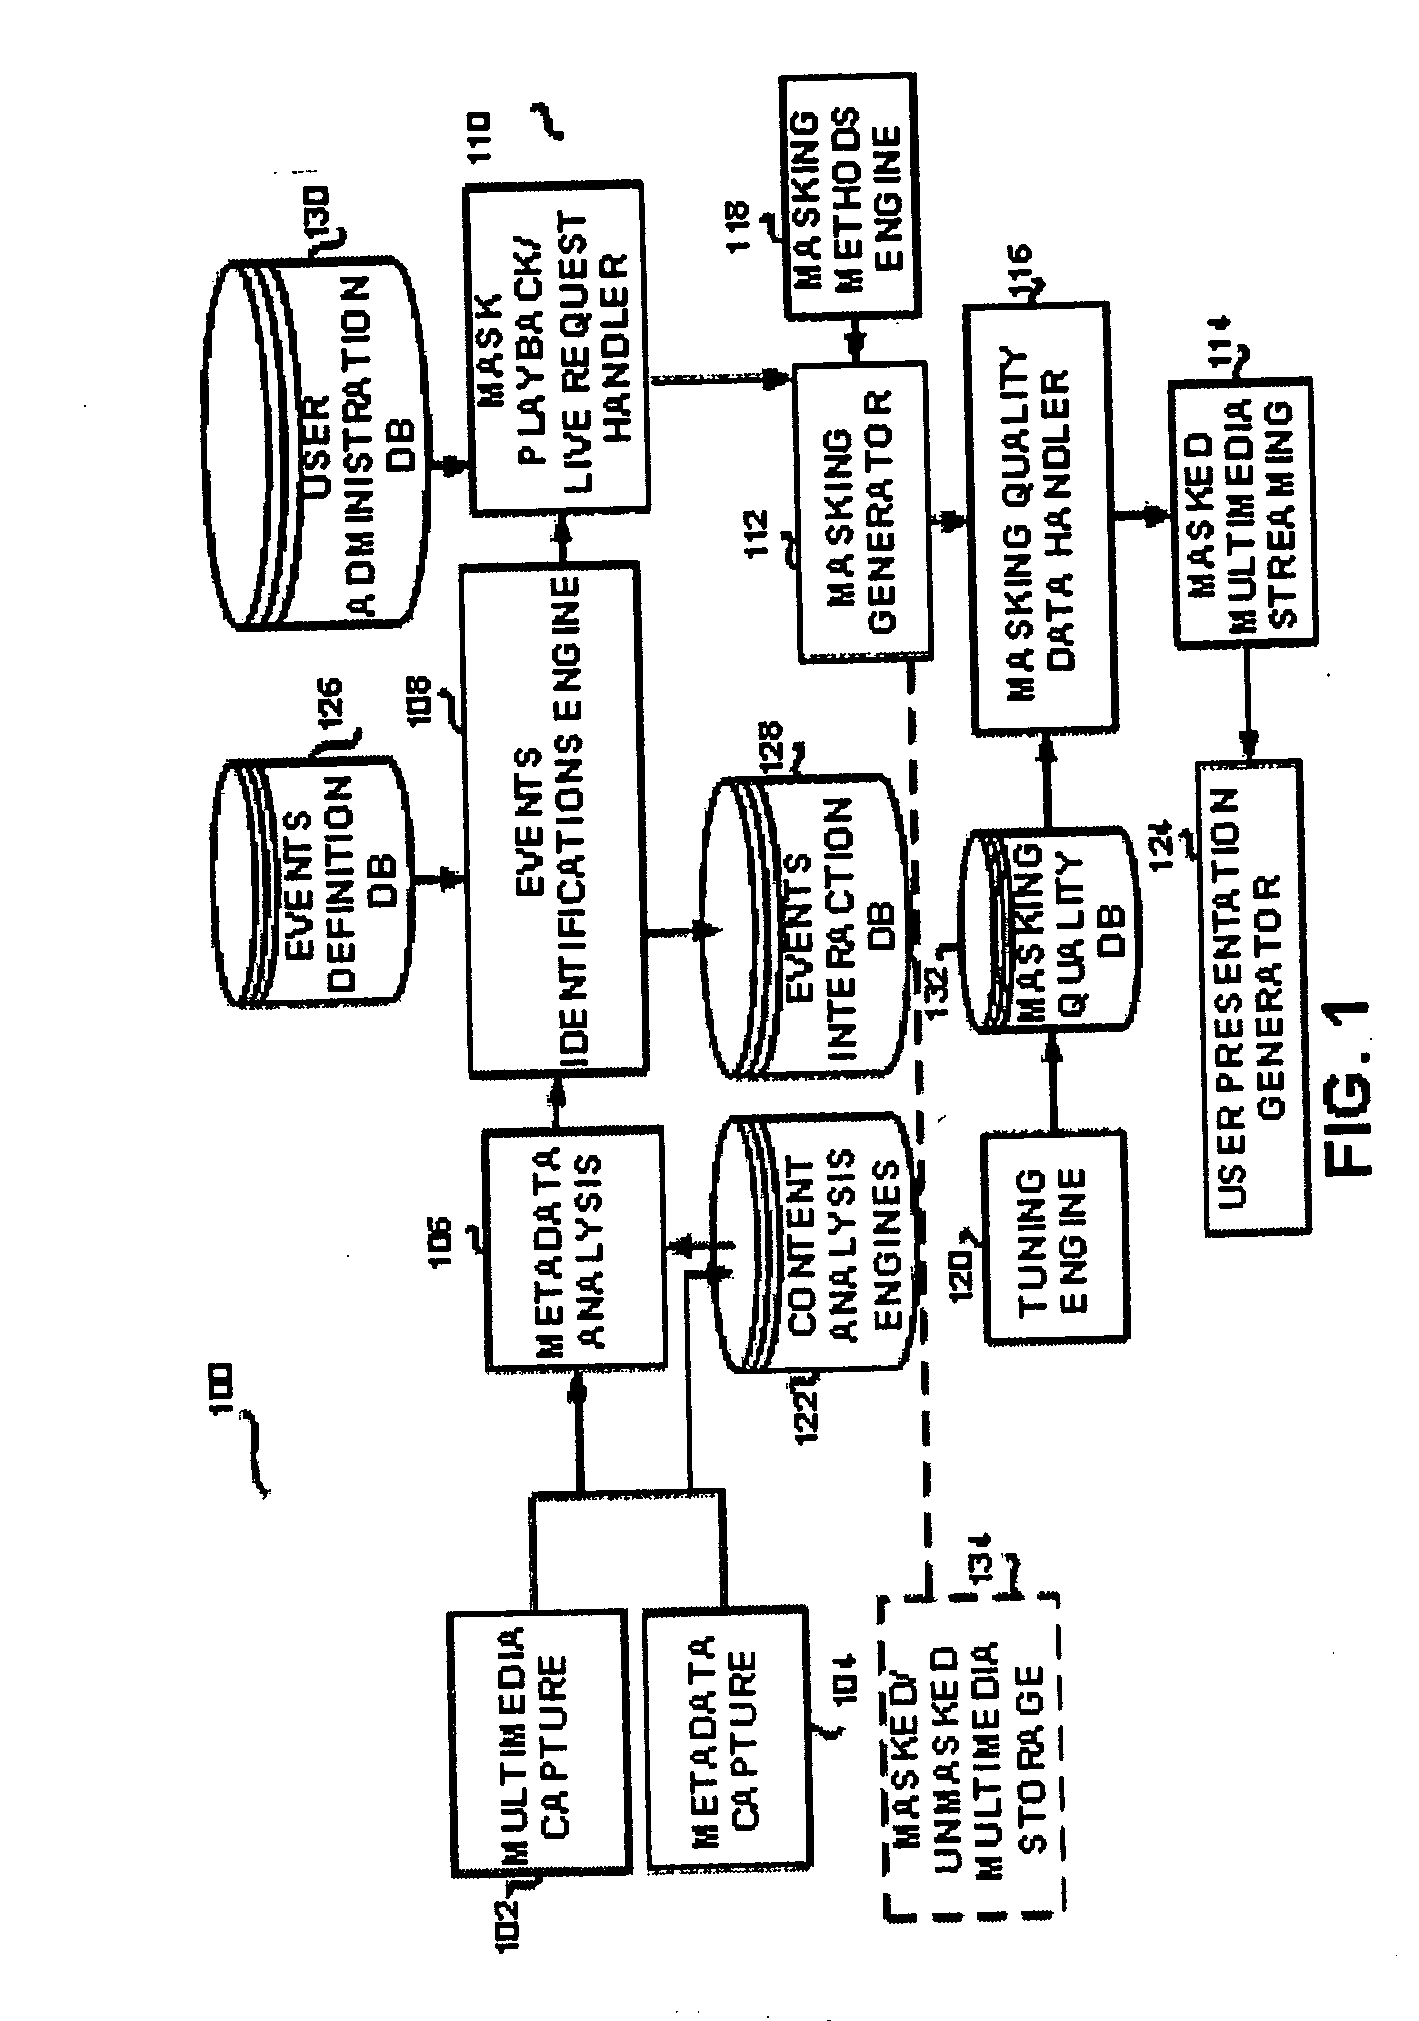 Apparatus and method for multimedia content based manipulation